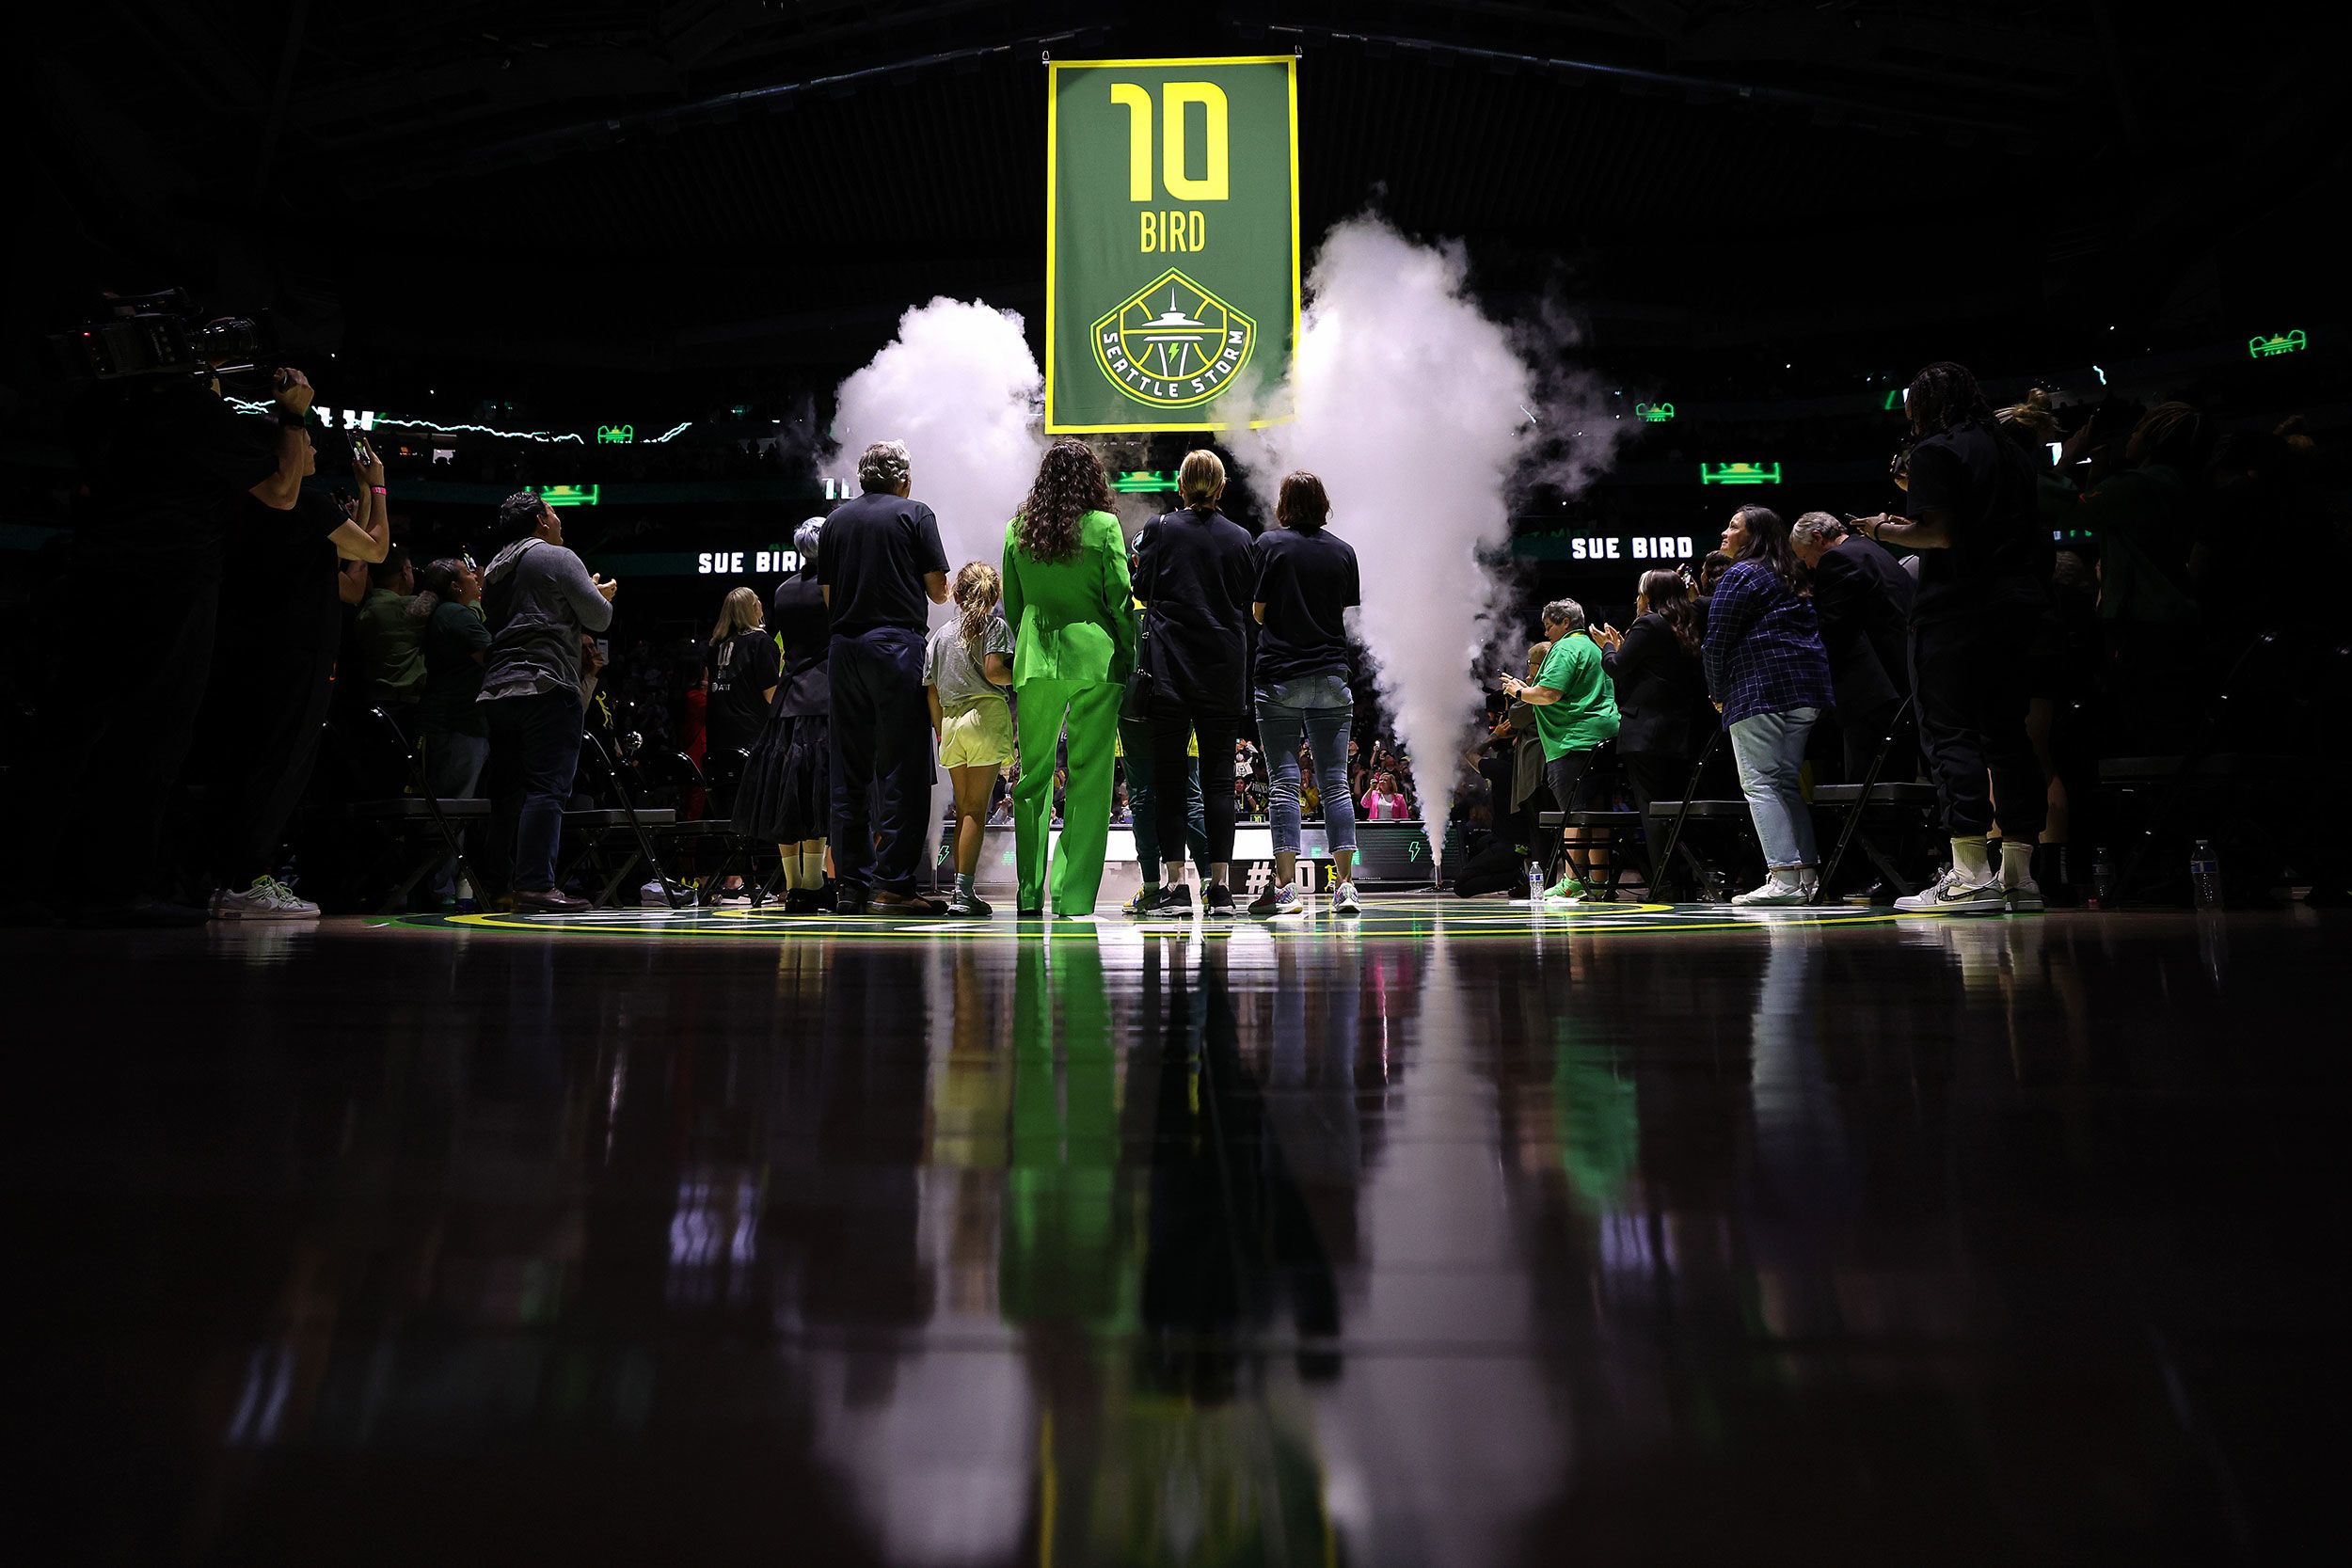 Storm do more than retire Sue Bird's jersey, they build monument of love  for No. 10